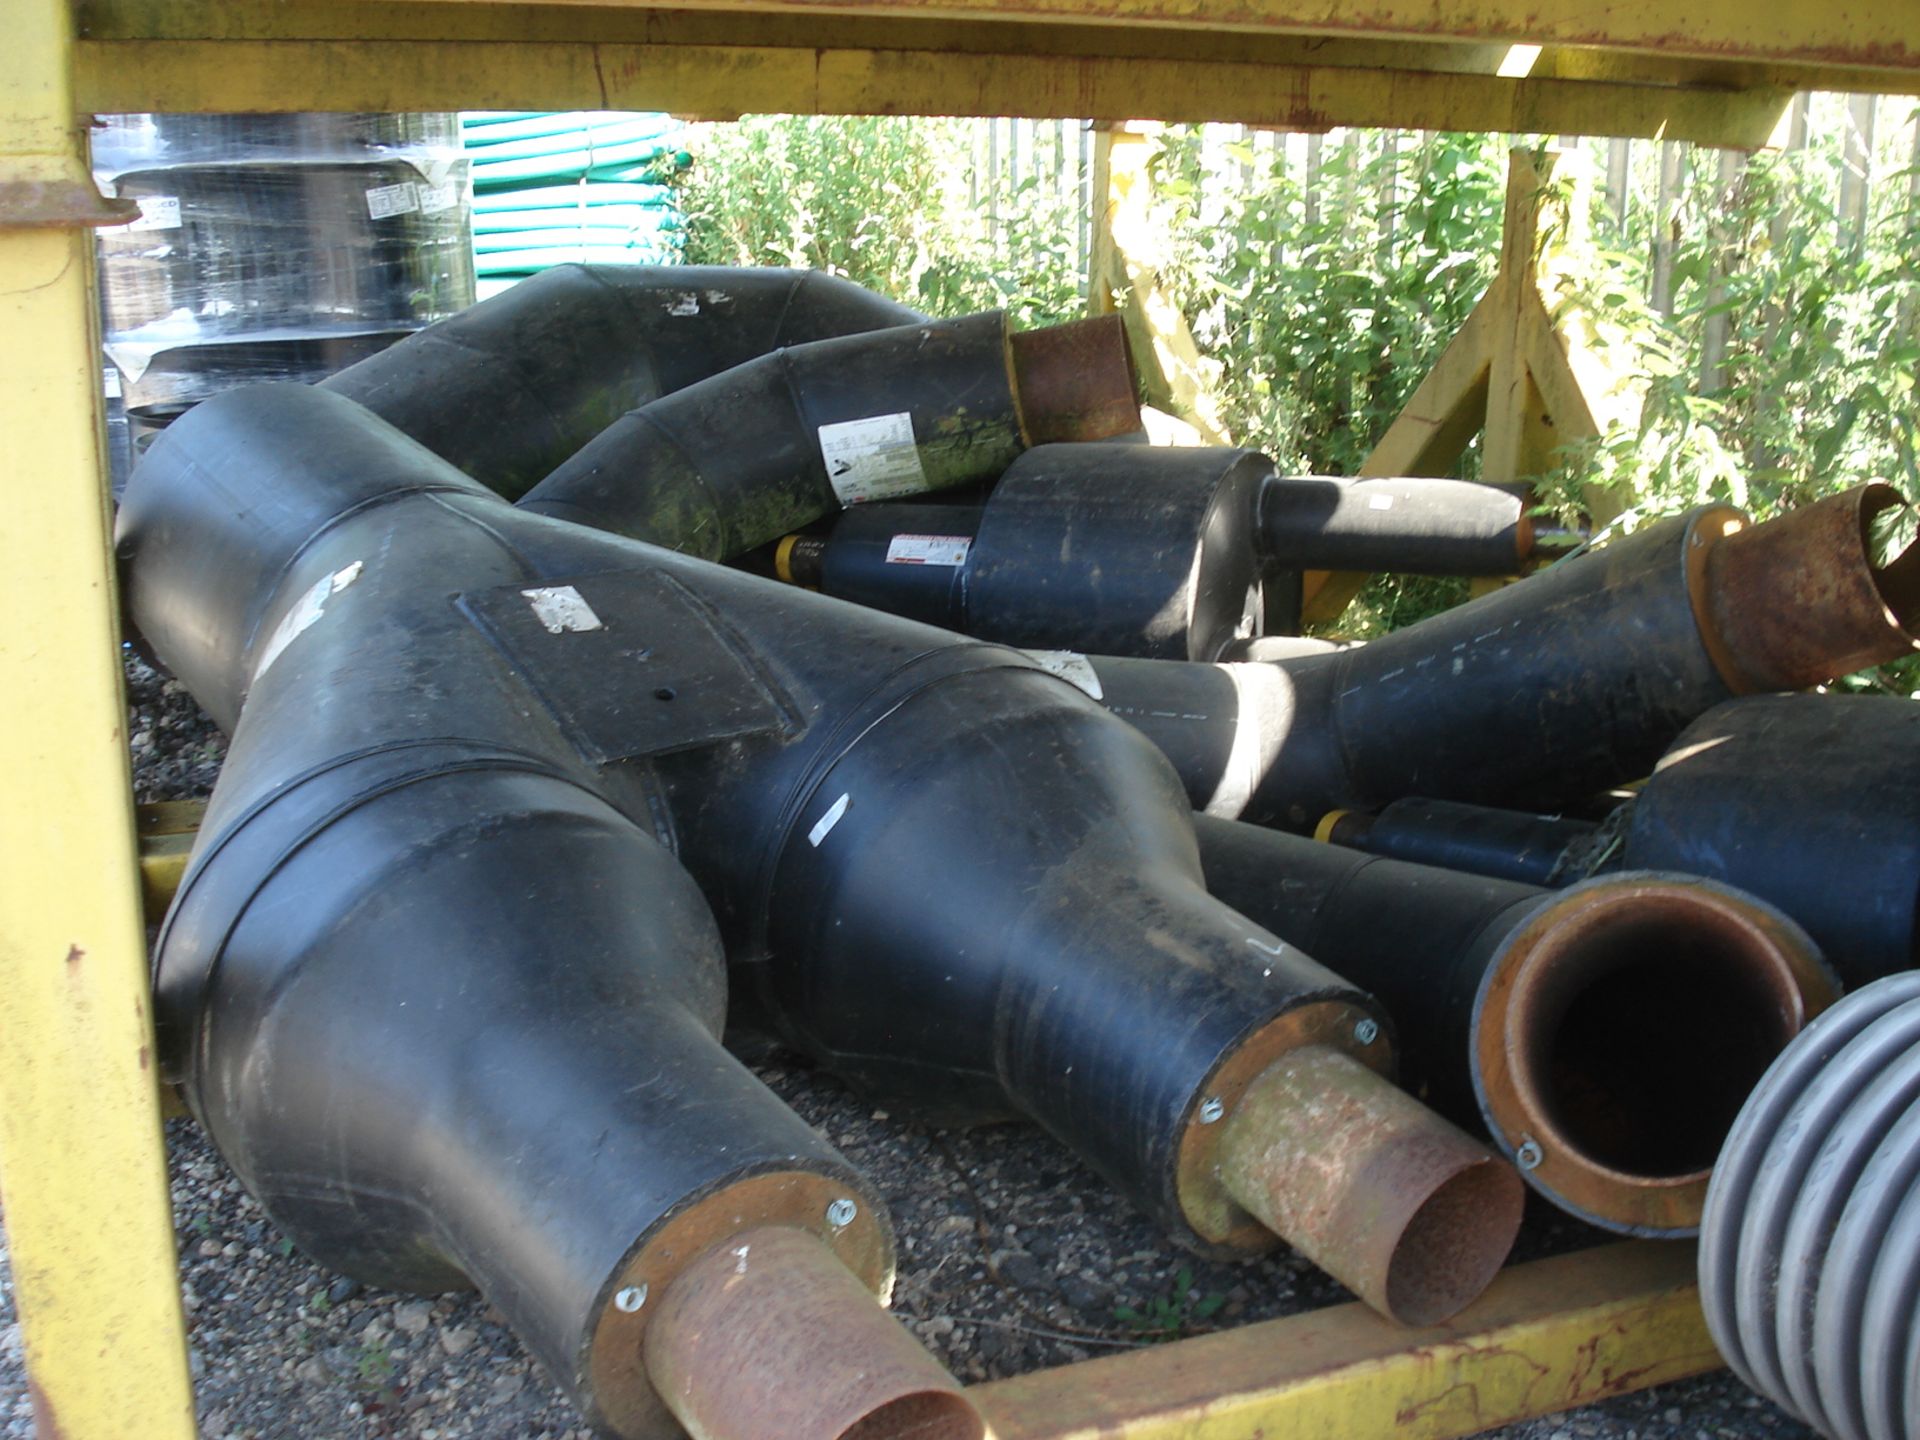 Large Quantity of Specialist District Heating Pipework and Fittings. - Image 21 of 38